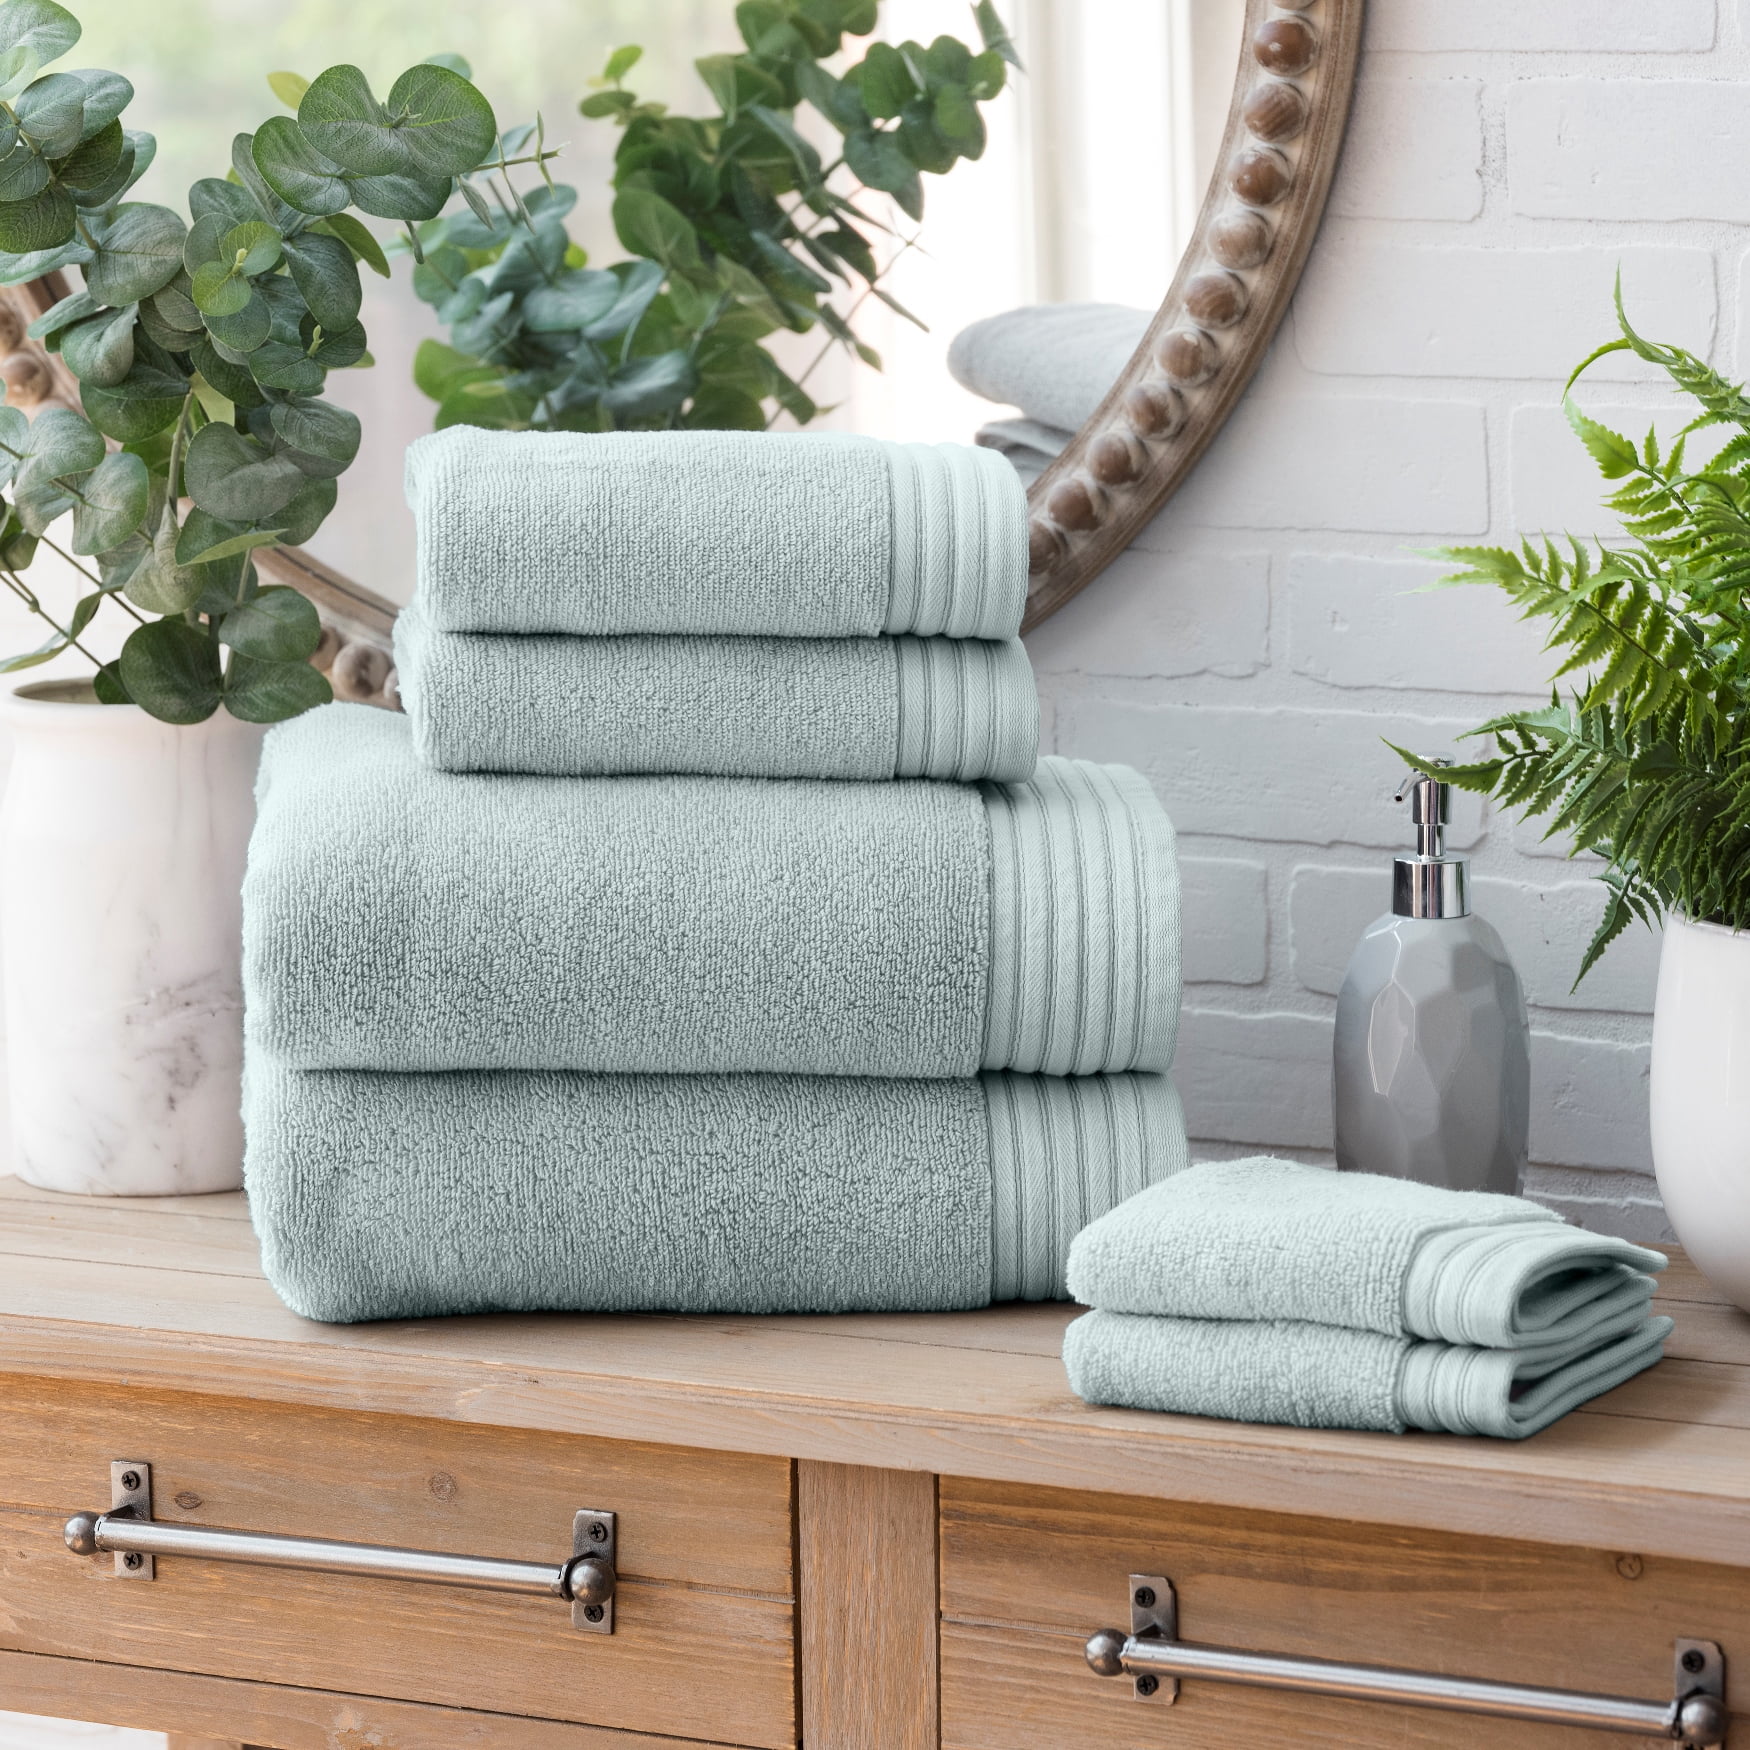 Hand Towel  Shop Towels, Robes and Bath & Body from The Peabody at Home